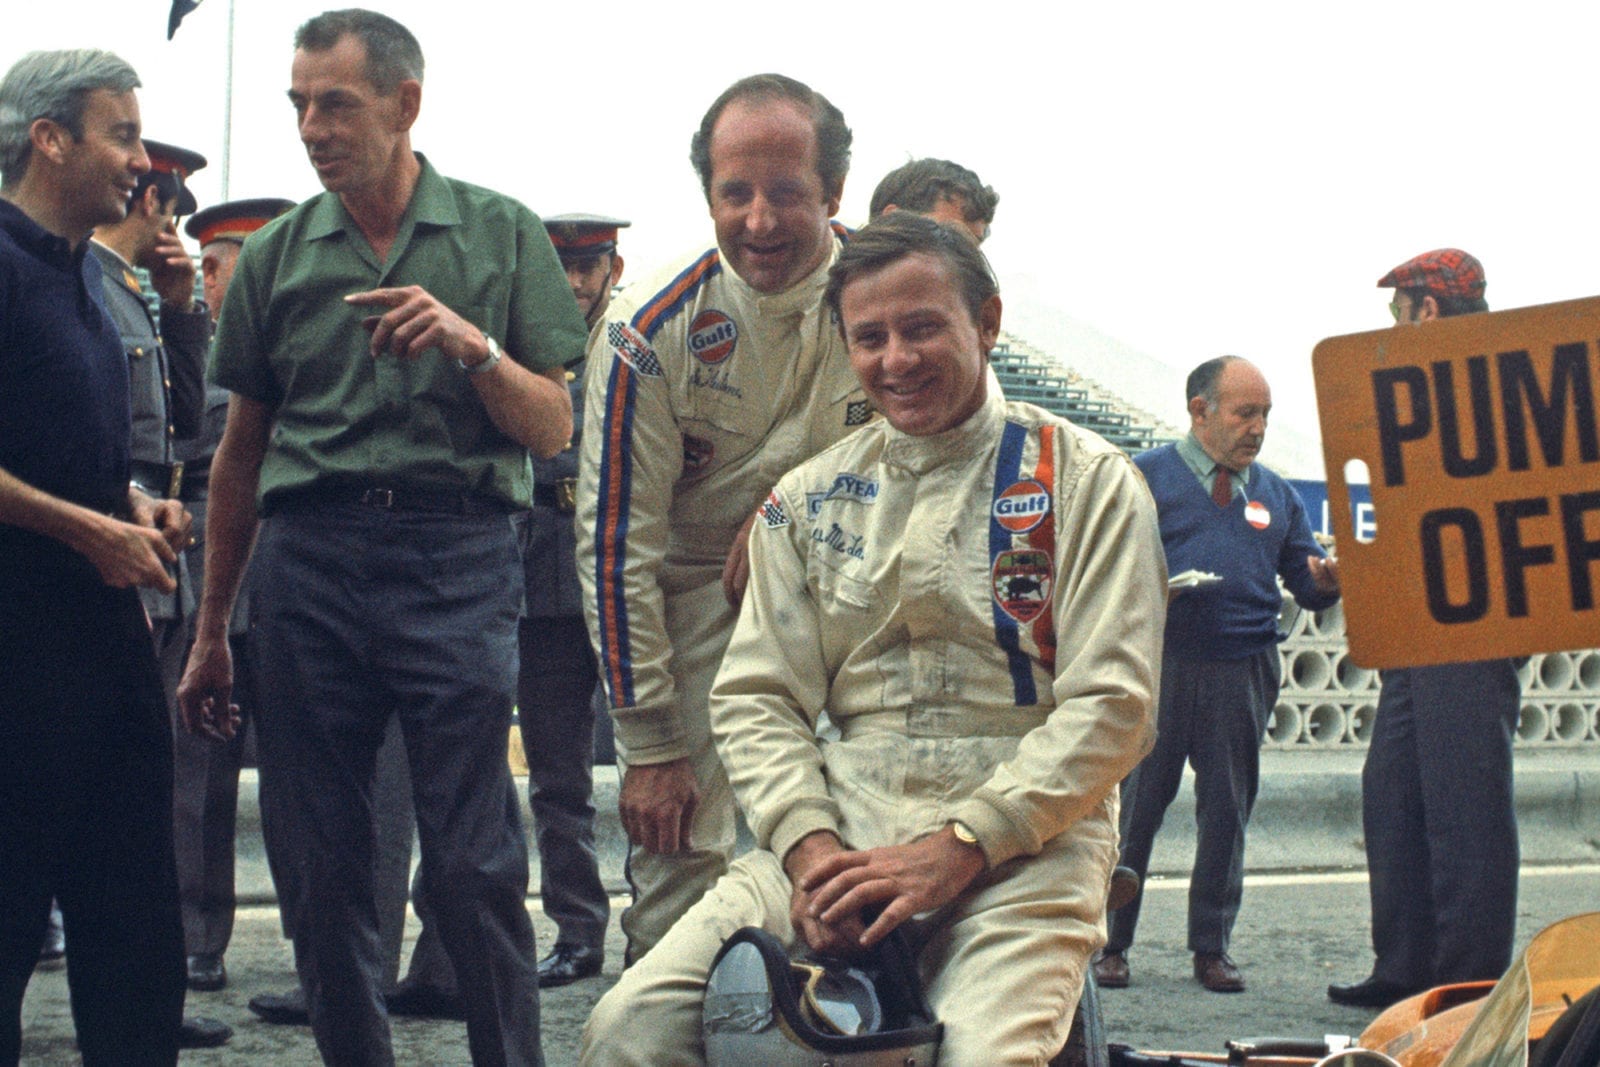 Bruce McLaren with Denny Hulme Ron Tauranac and Teddy Mayer